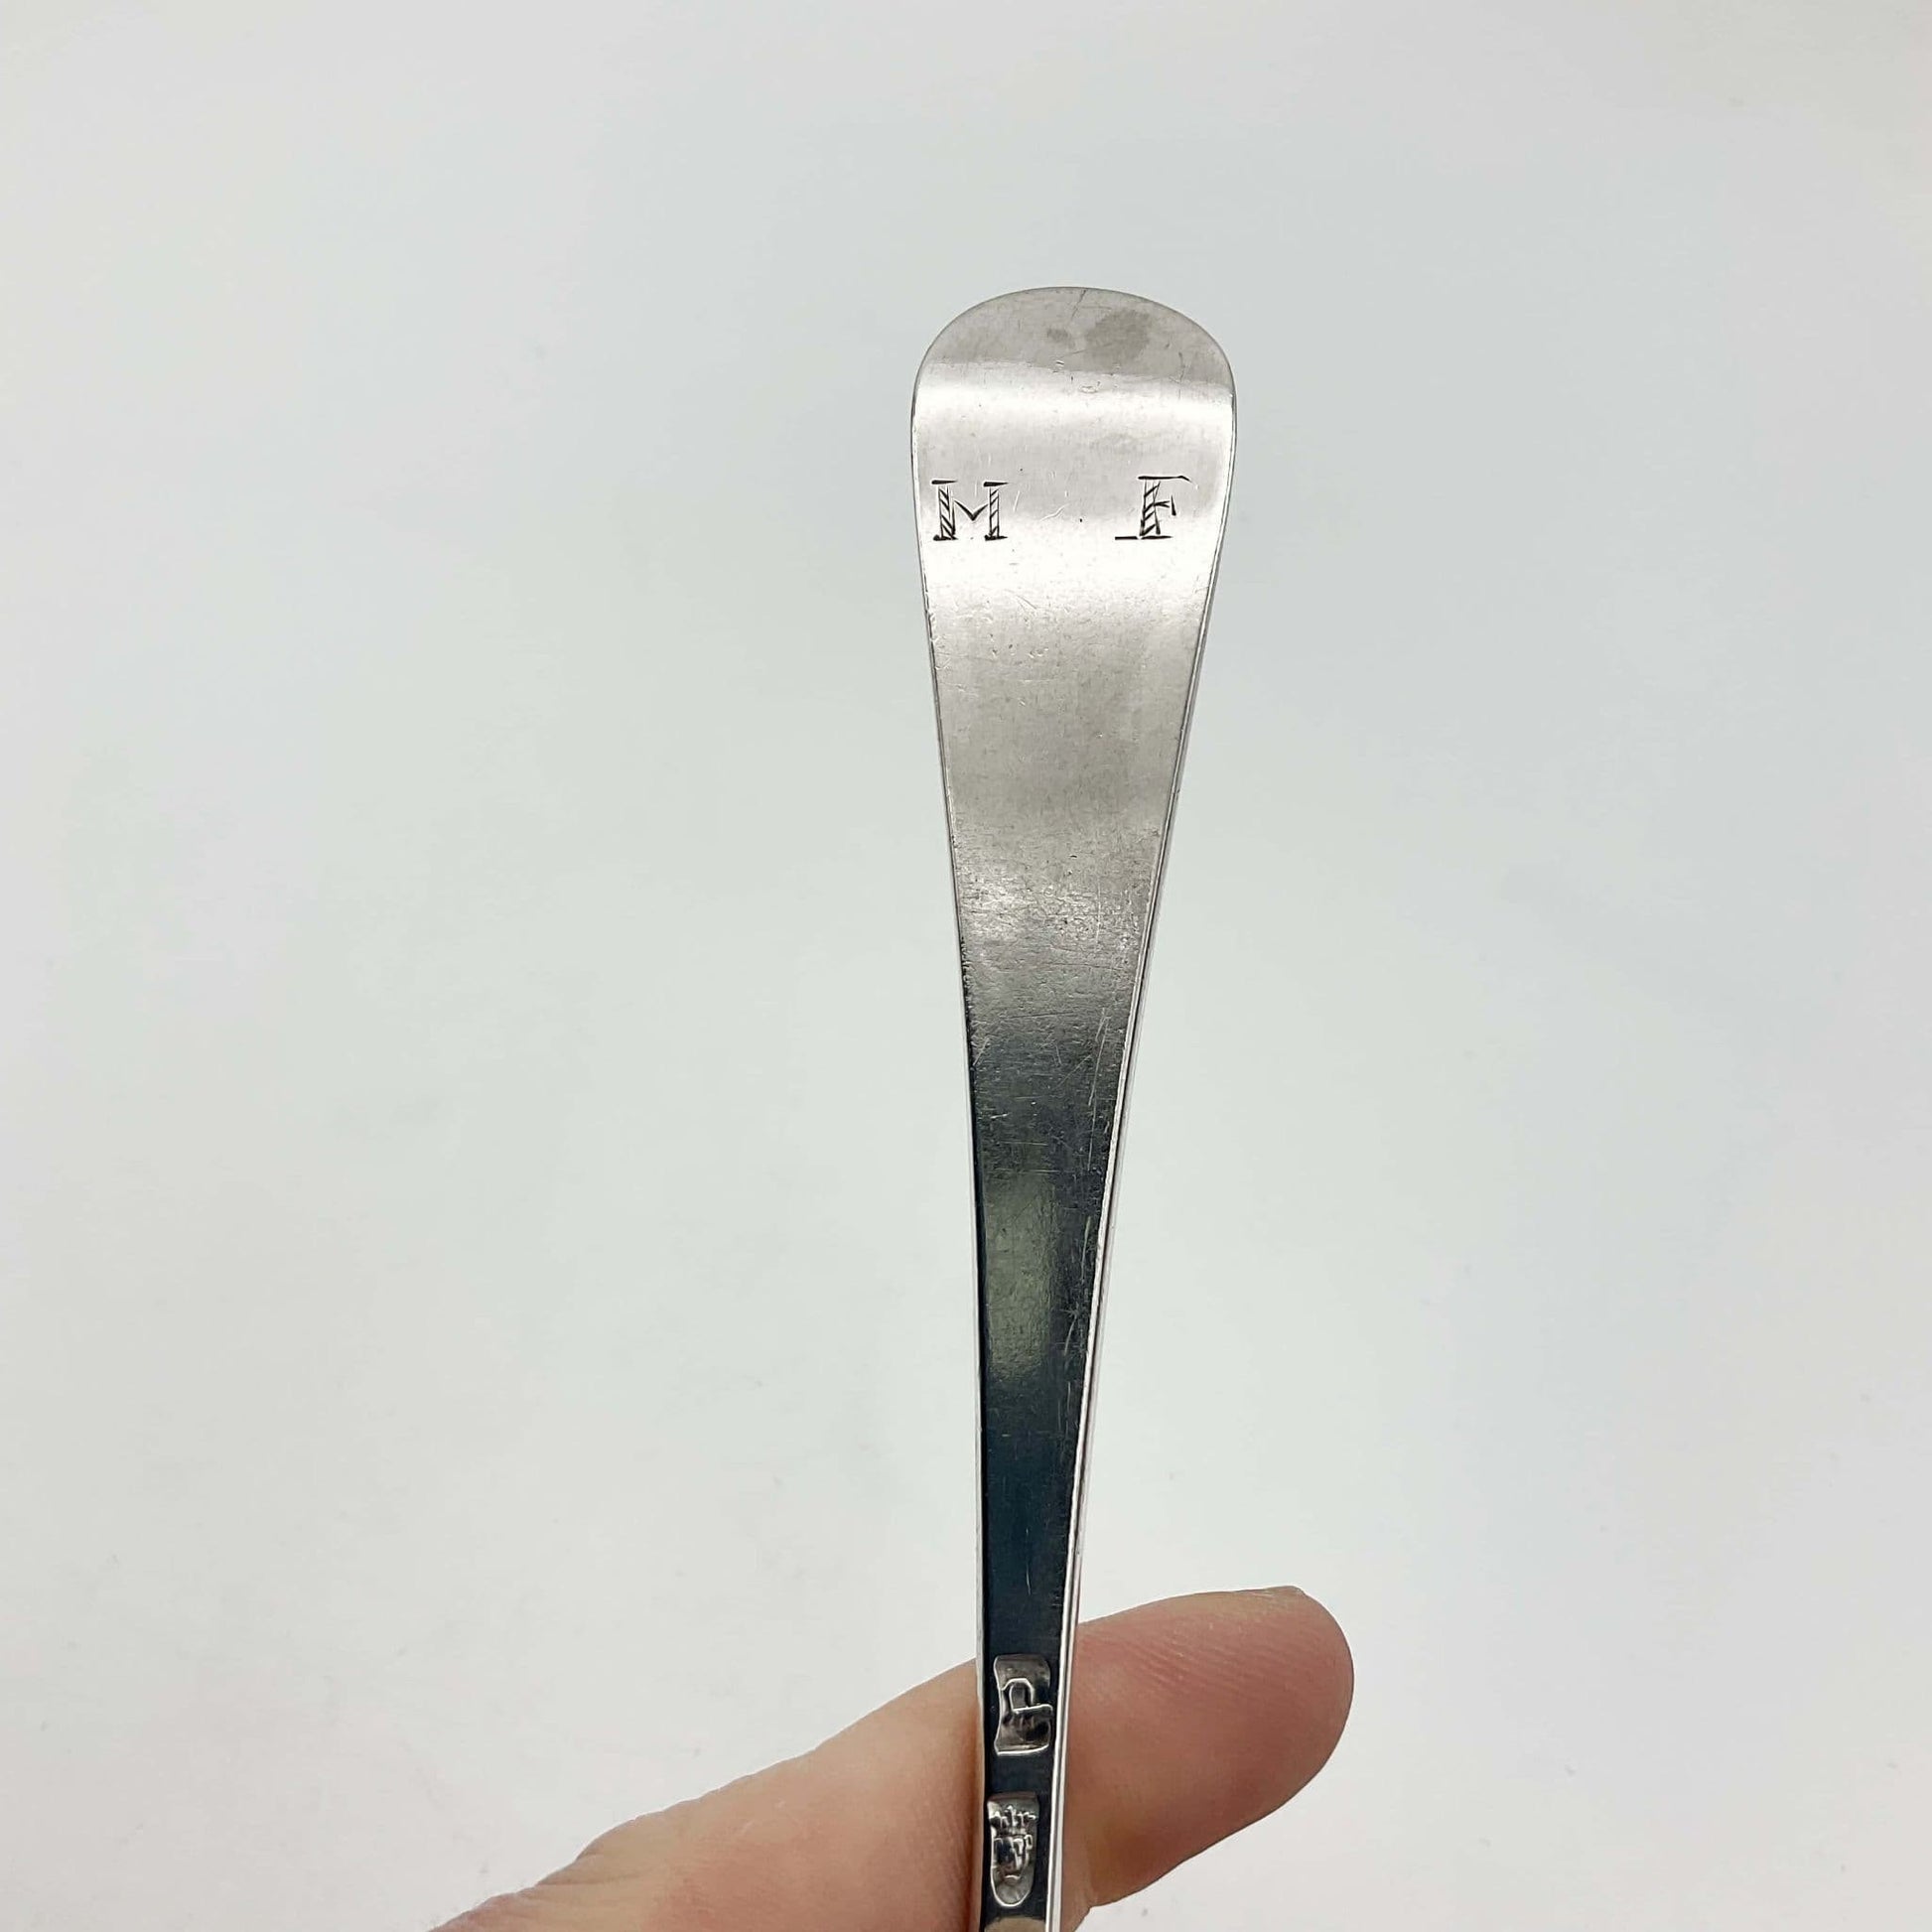 MF engraved at the top of a handle of silver spoon